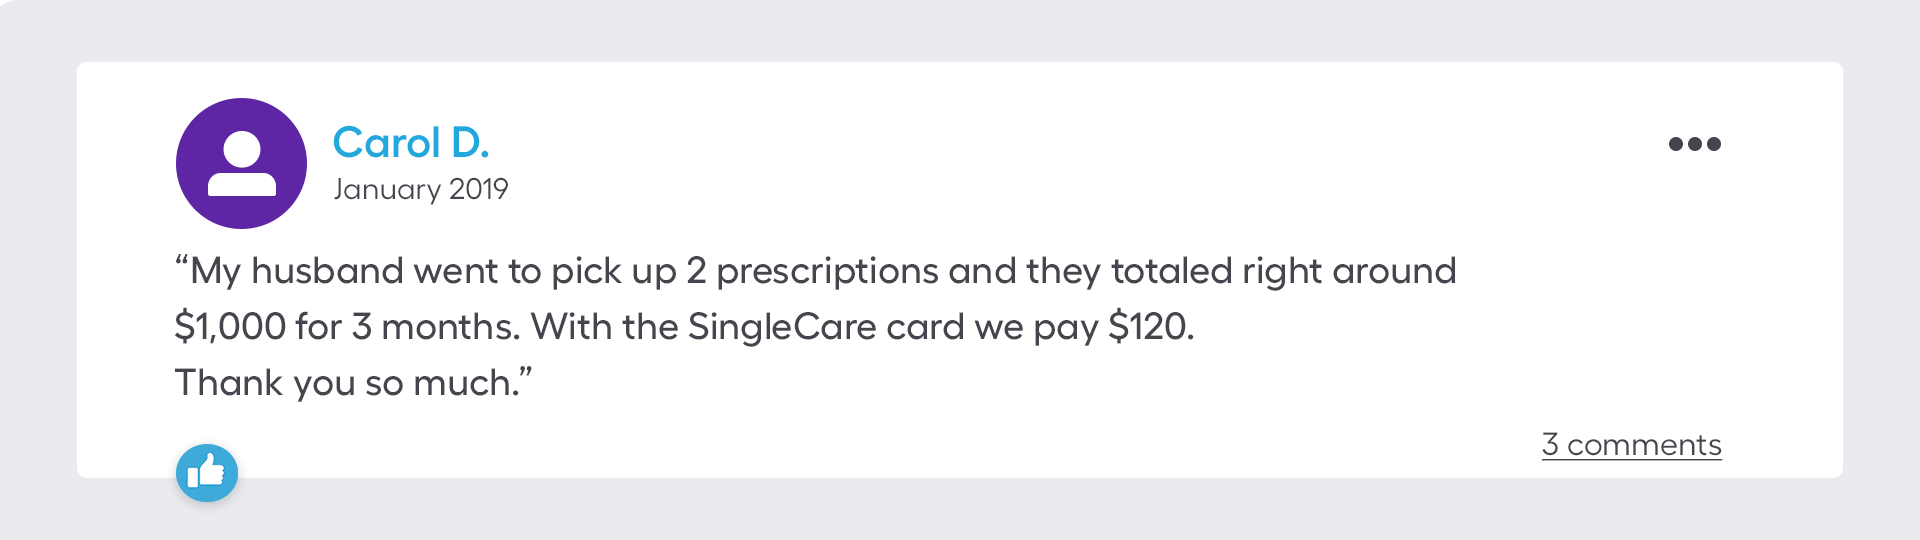 My husband went to pick up 2 prescriptions and they totaled right around $1000.00 for 3 months. With the SingleCare card we pay $100. Thank you so much